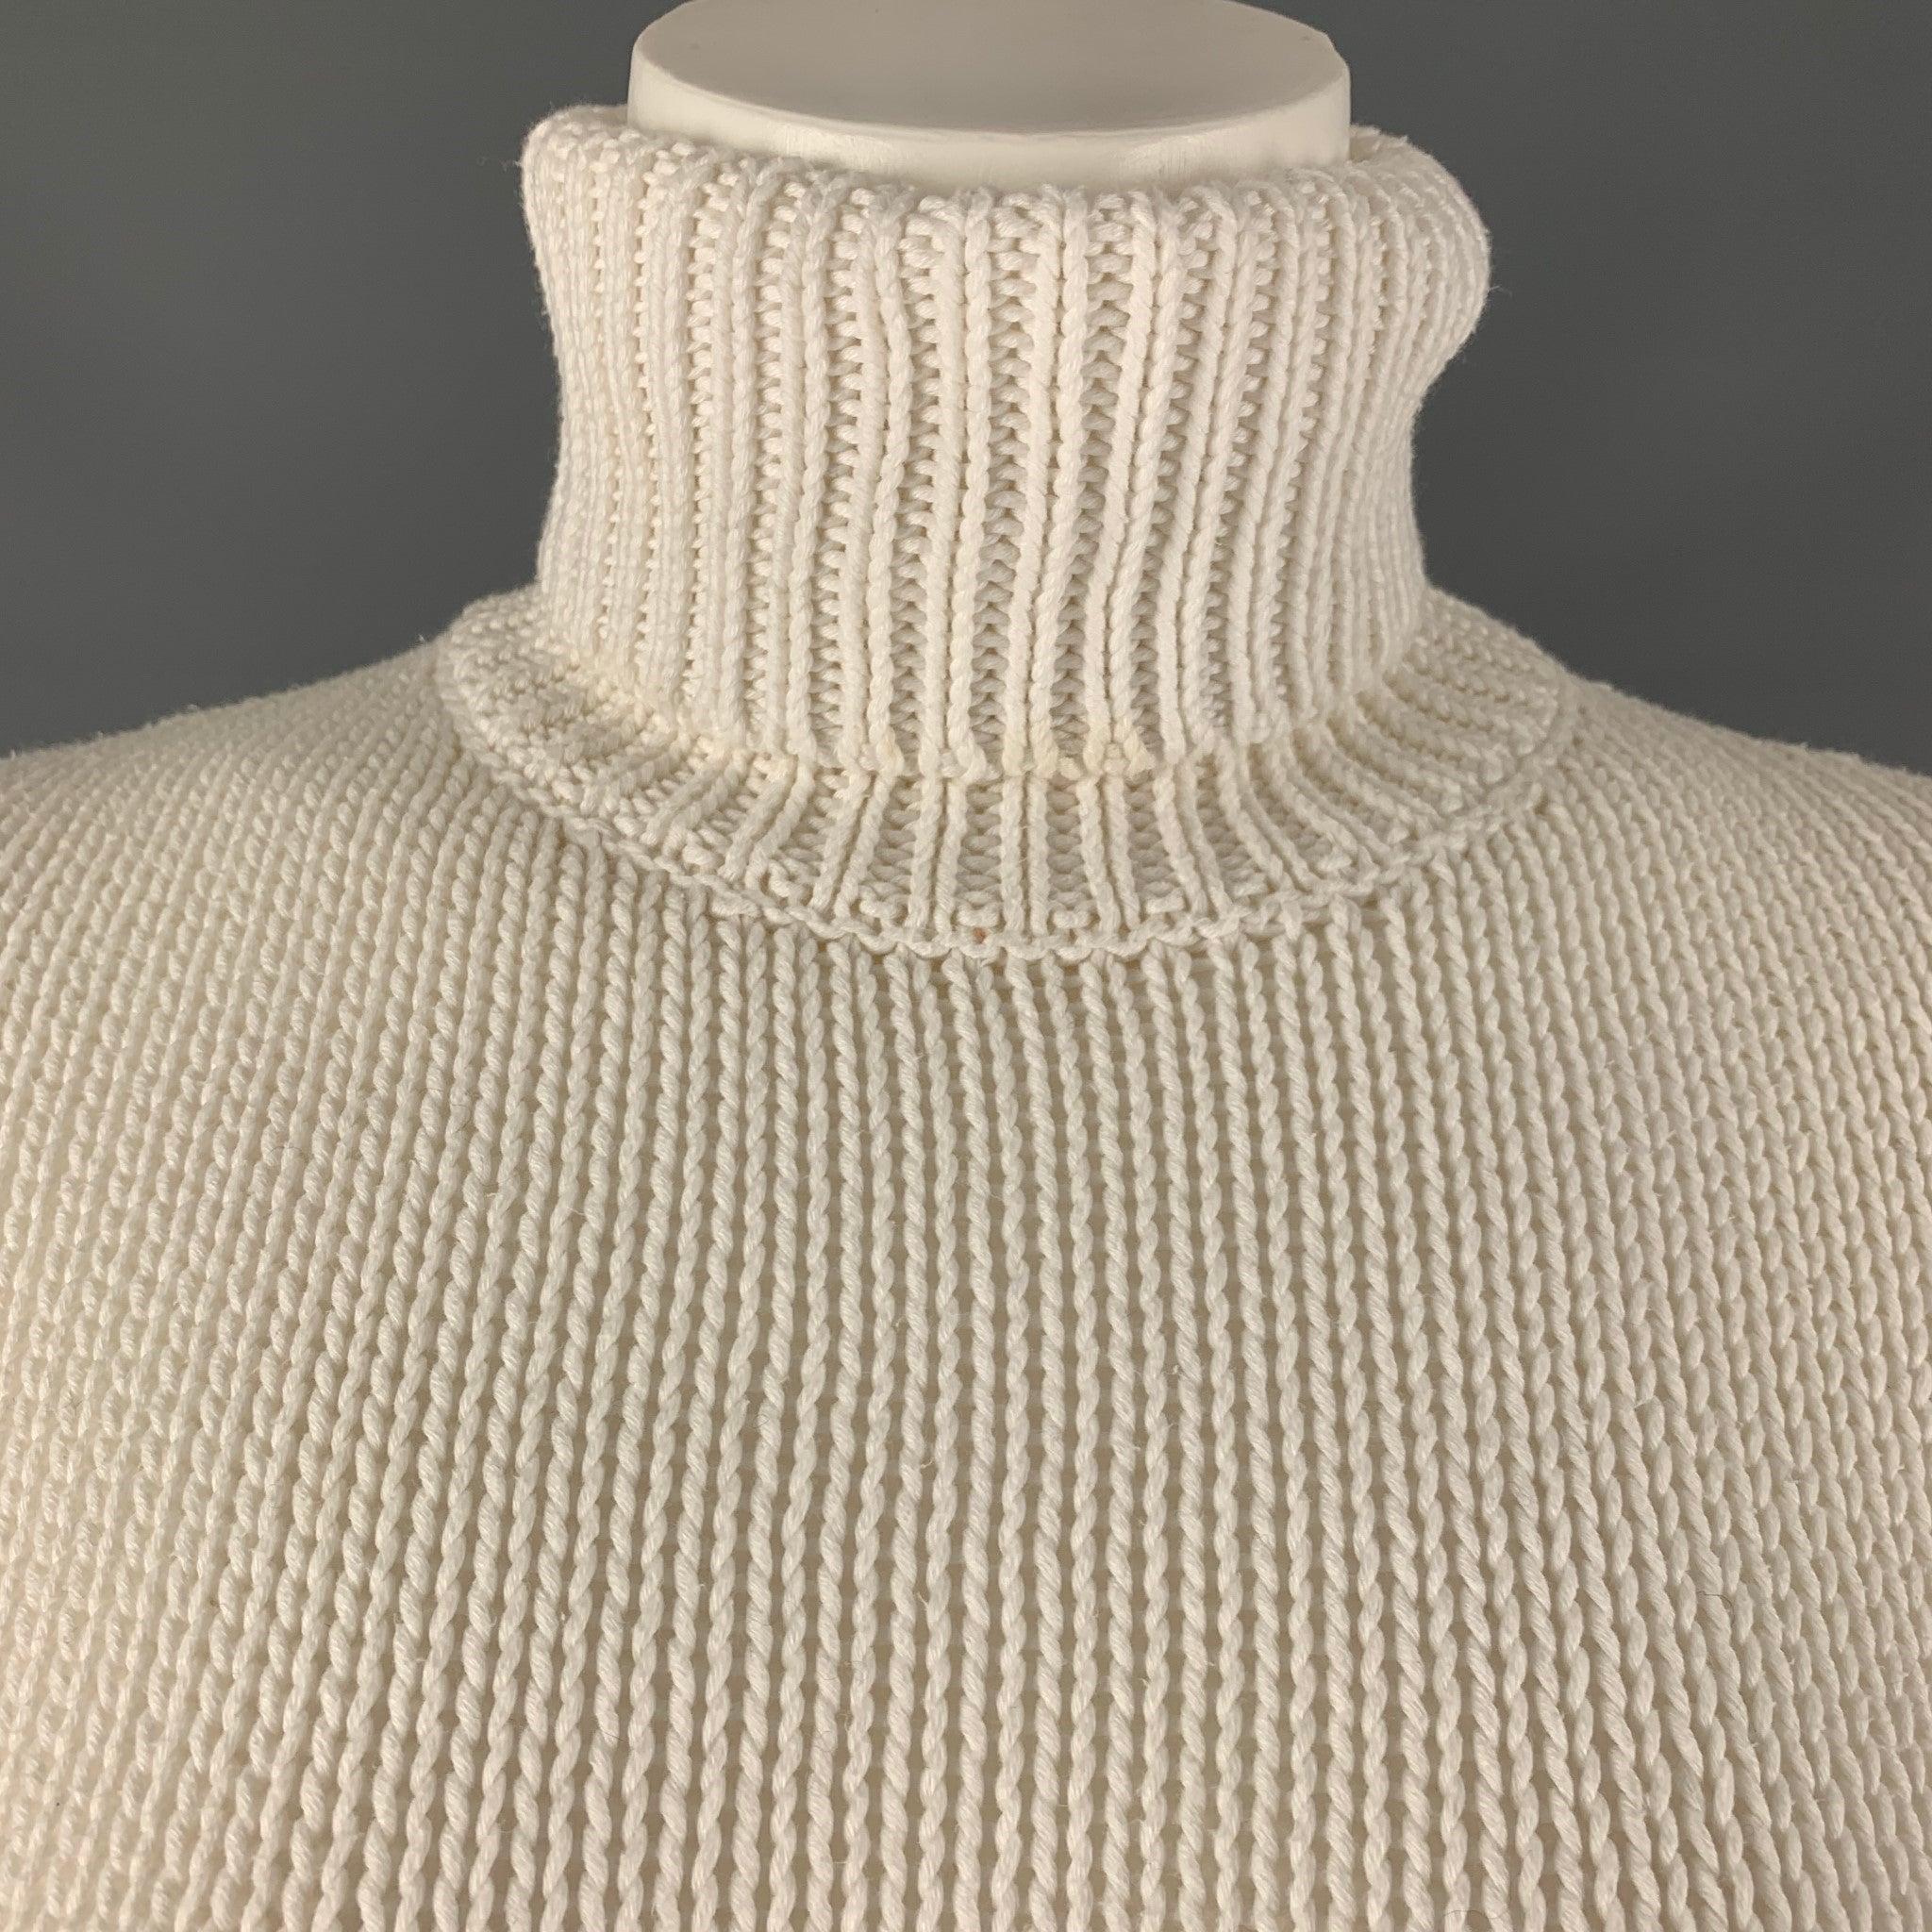 RALPH LAUREN COLLECTION pullover comes in a white cotton knit material featuring a turtleneck. Made in Italy. Very Good Pre-Owned Condition. 

Marked:   M 

Measurements: 
 
Shoulder: 15 inches Chest: 34 inches Sleeve: 29 inches Length: 20 inches  
